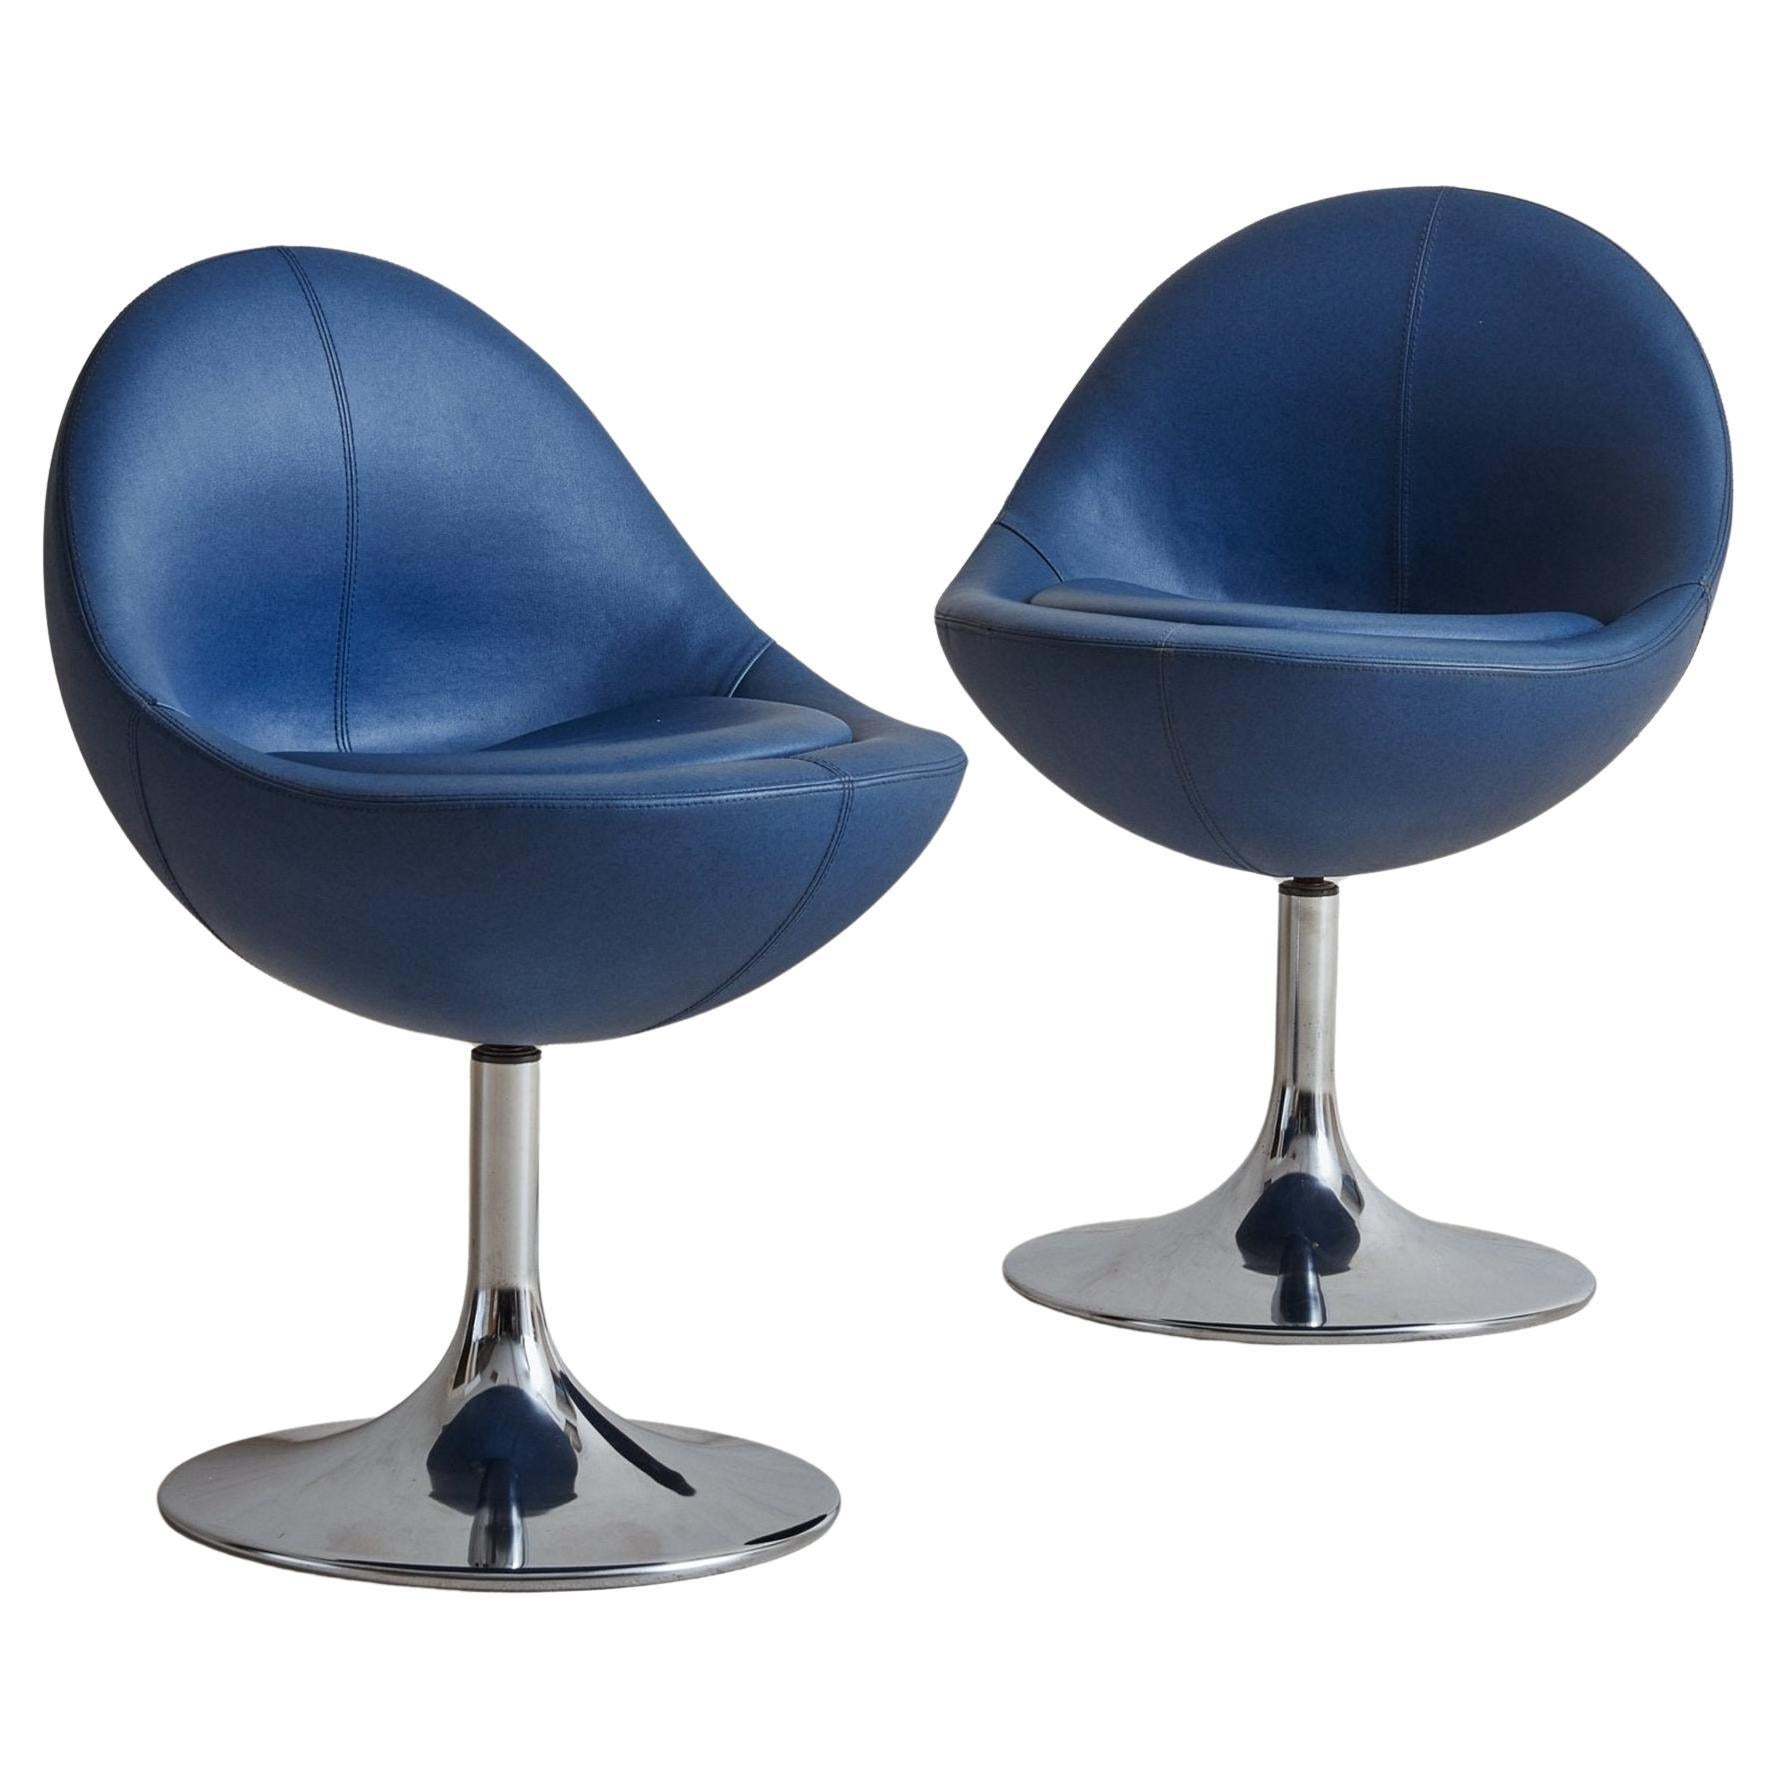 A set of 6 ‘Venus’ dining chairs by Swedish designer Börje Johanson for his family business, Johanson. These chairs feature curved, upholstered egg shaped seats with handsome stitch detailing and removable cushions. They have aluminum swivel tulip